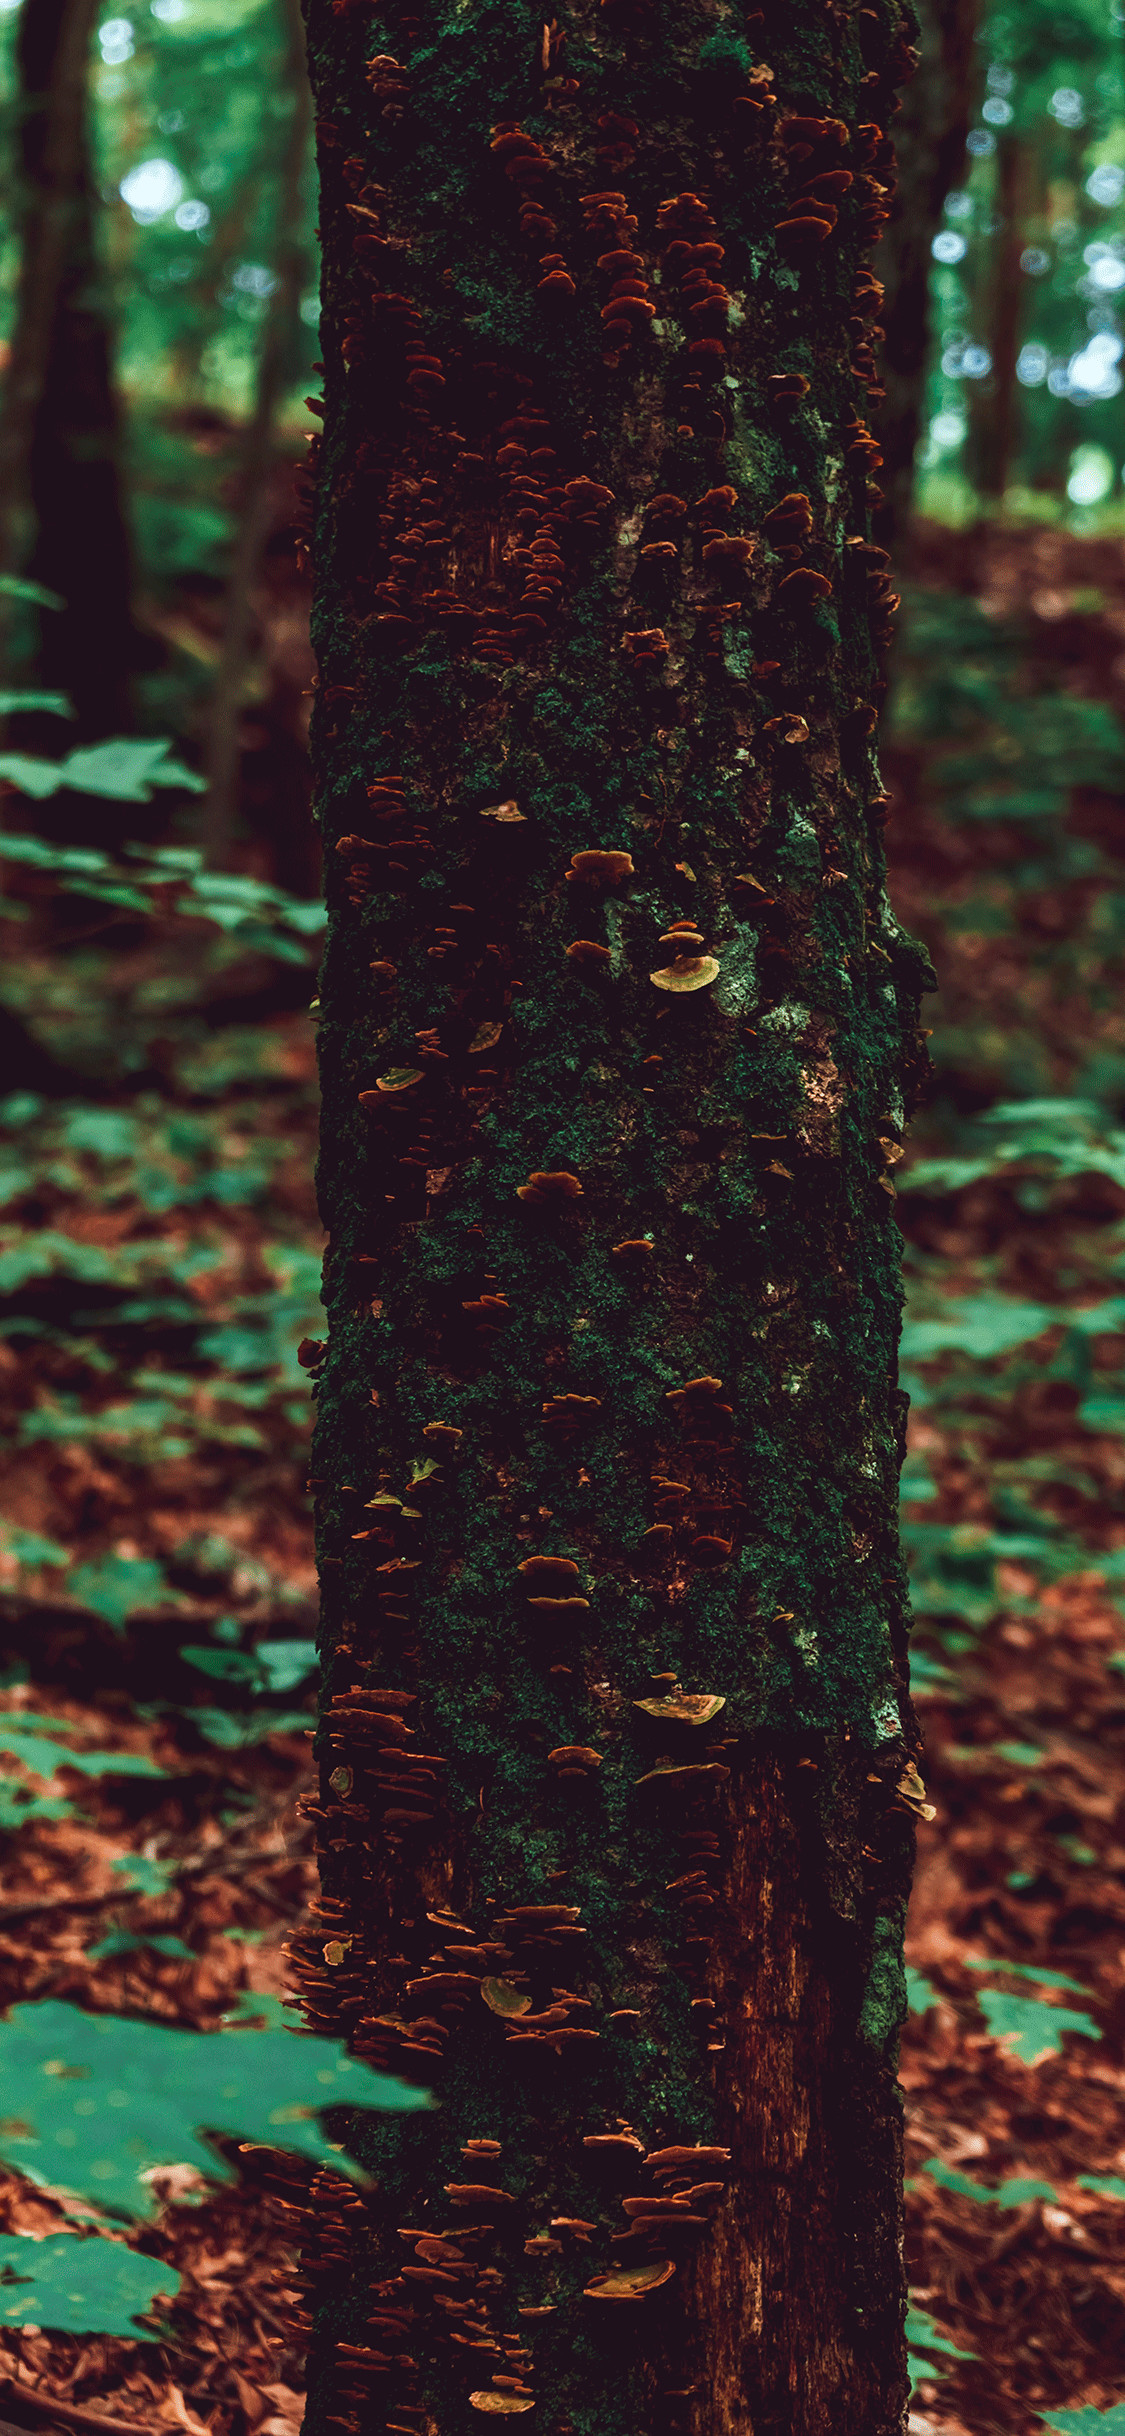 1125x2436 iPhone wallpaper forest mushroom tree Forest